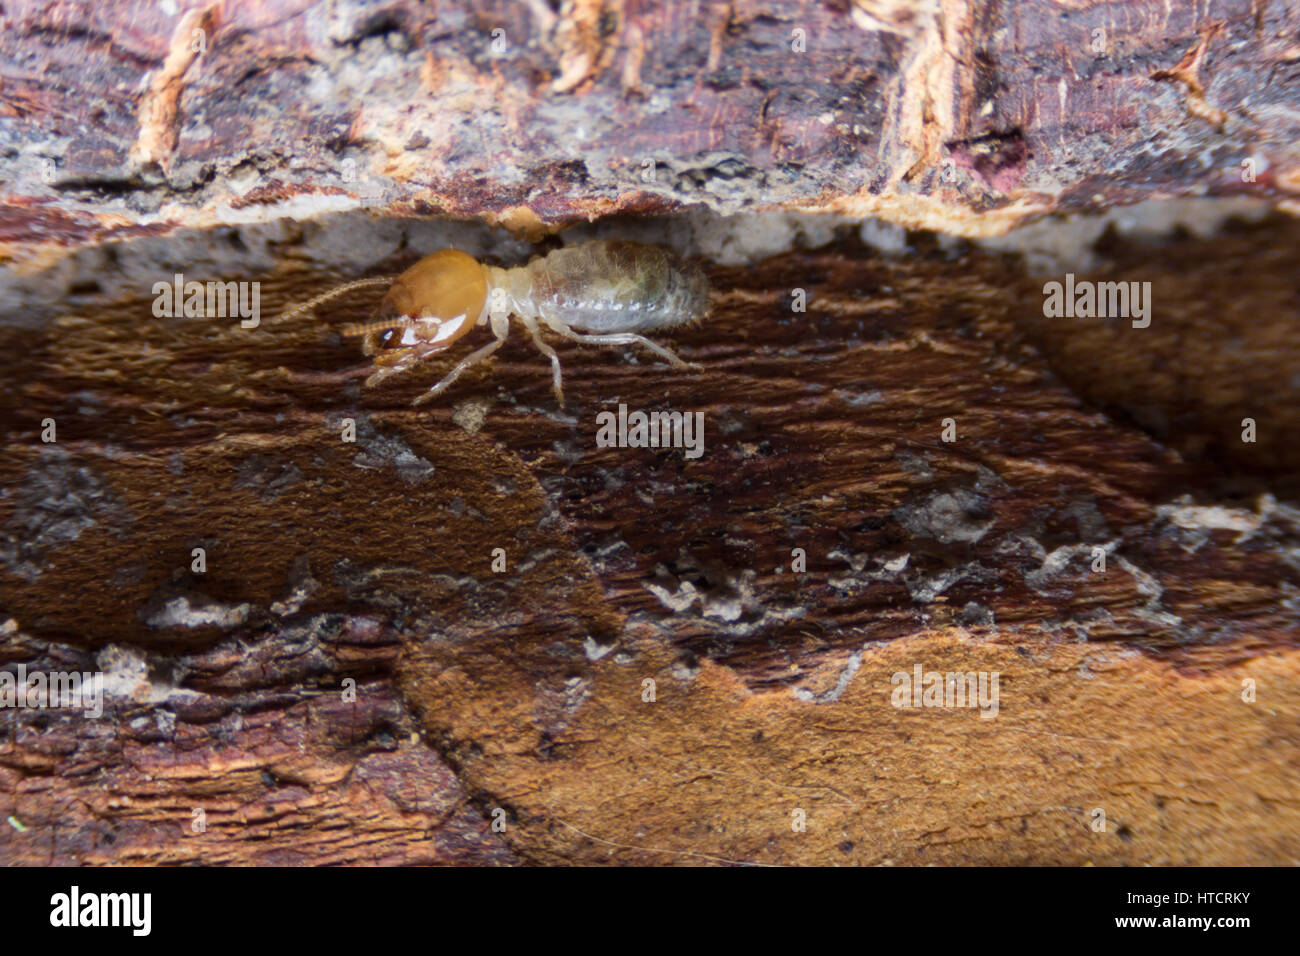 Termite, Termites eat wood like an animal in the house Stock Photo - Alamy